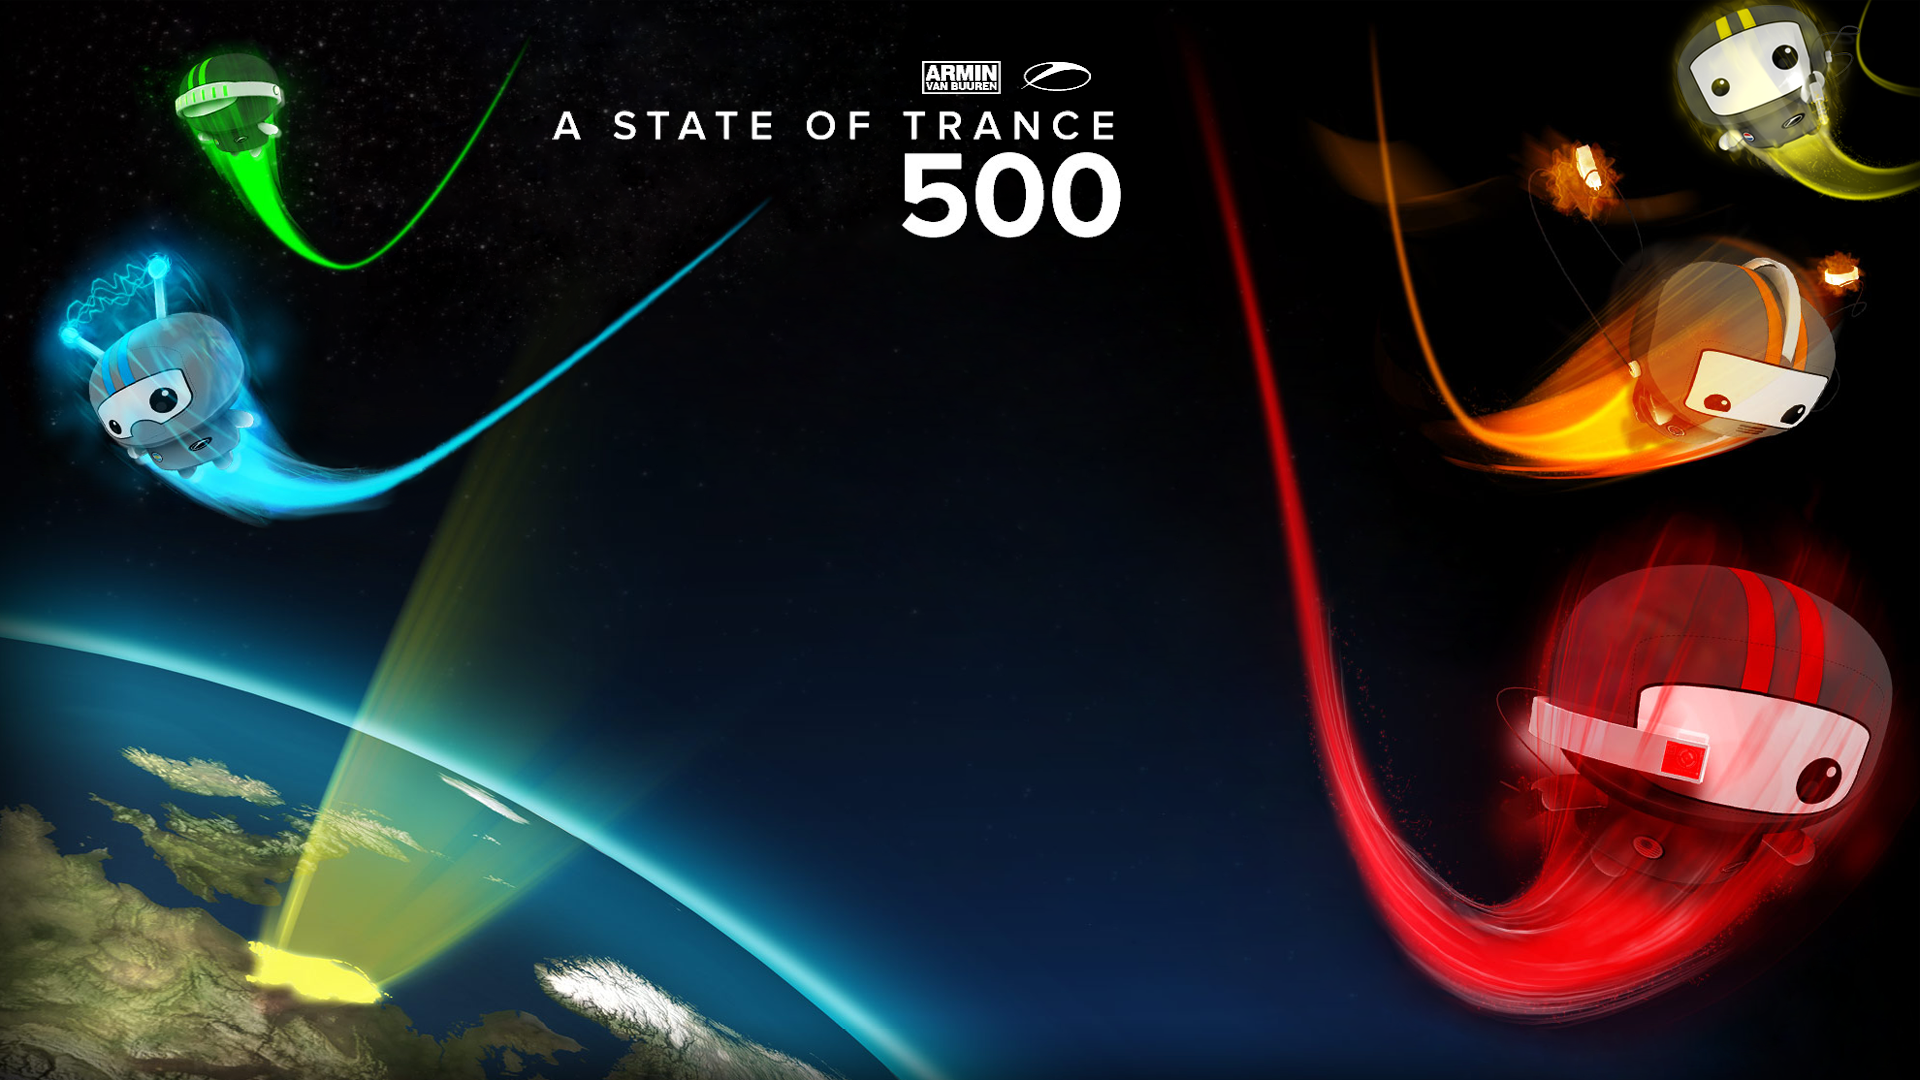 Wallpaper HDtv Widescreen Xmynox A State Of Trance